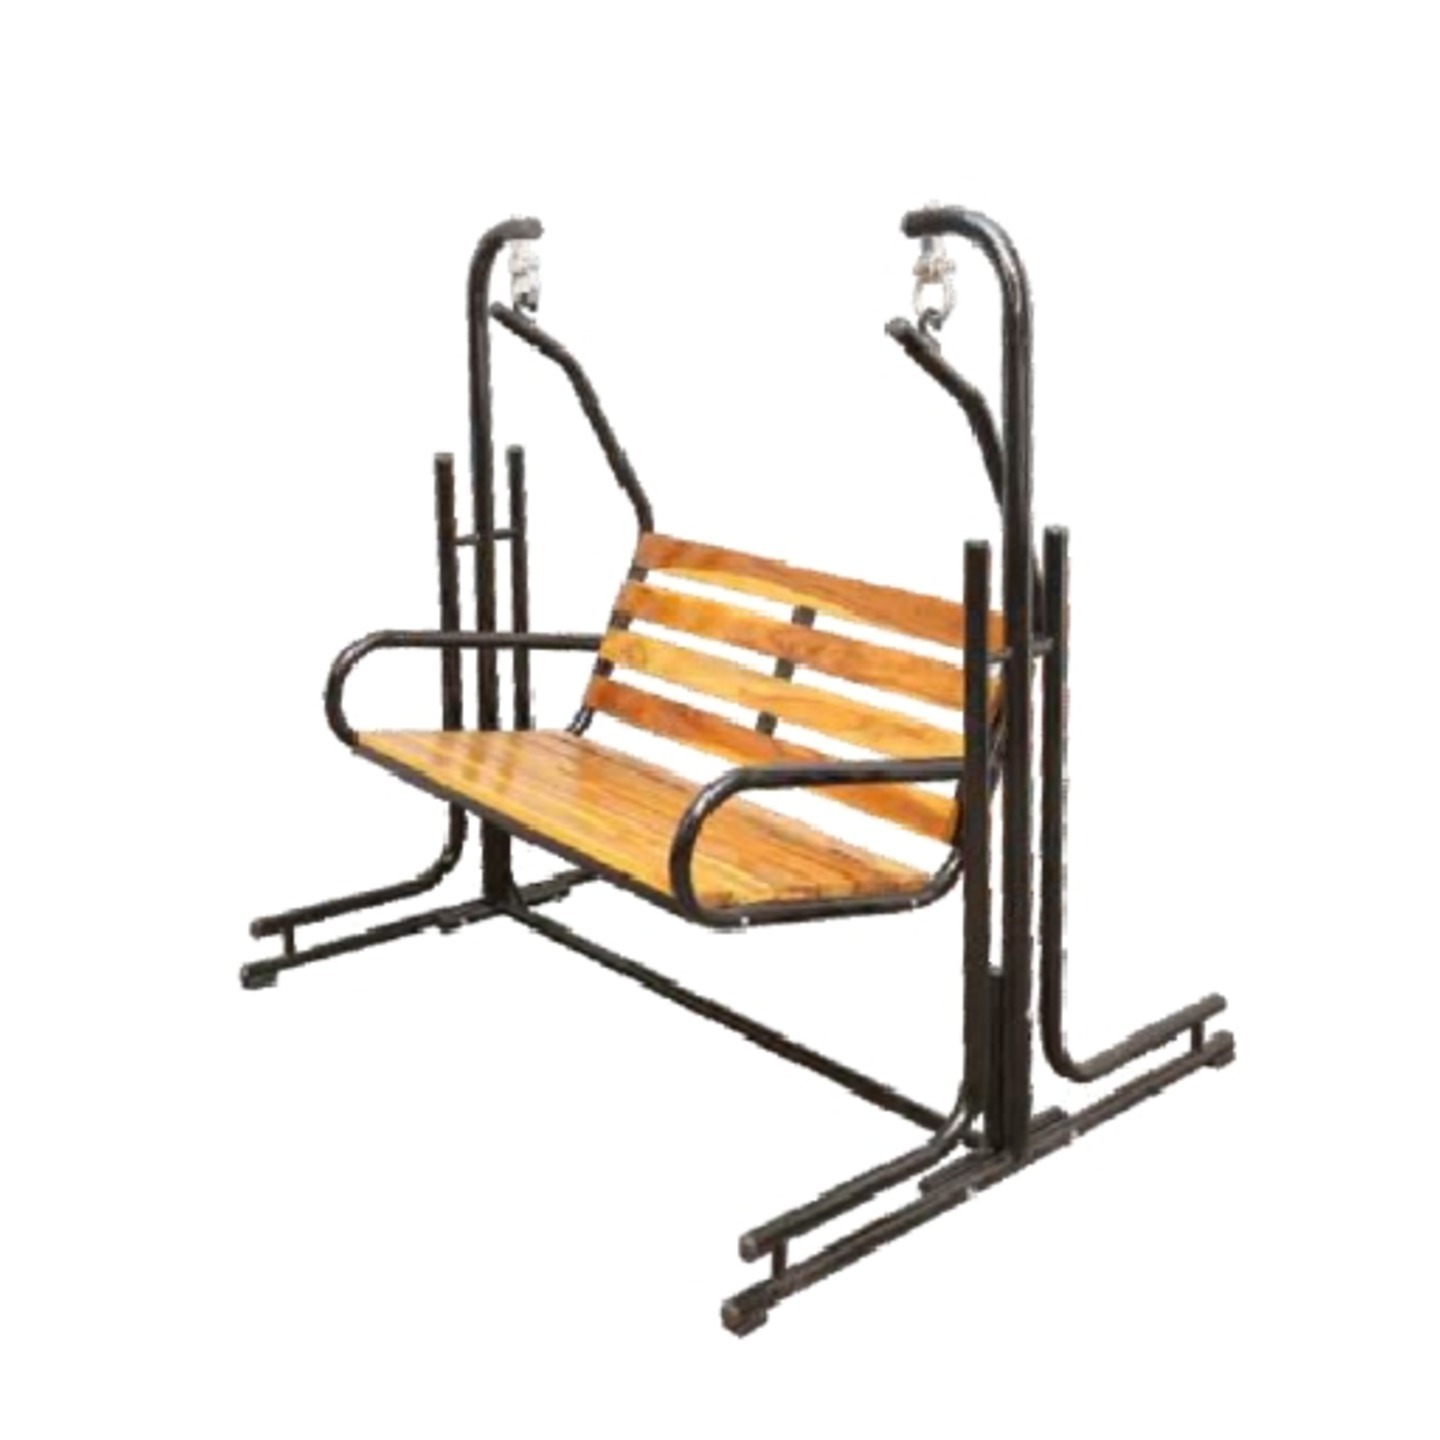 HJA Swing With Stand HOJ-044 In Black Colour